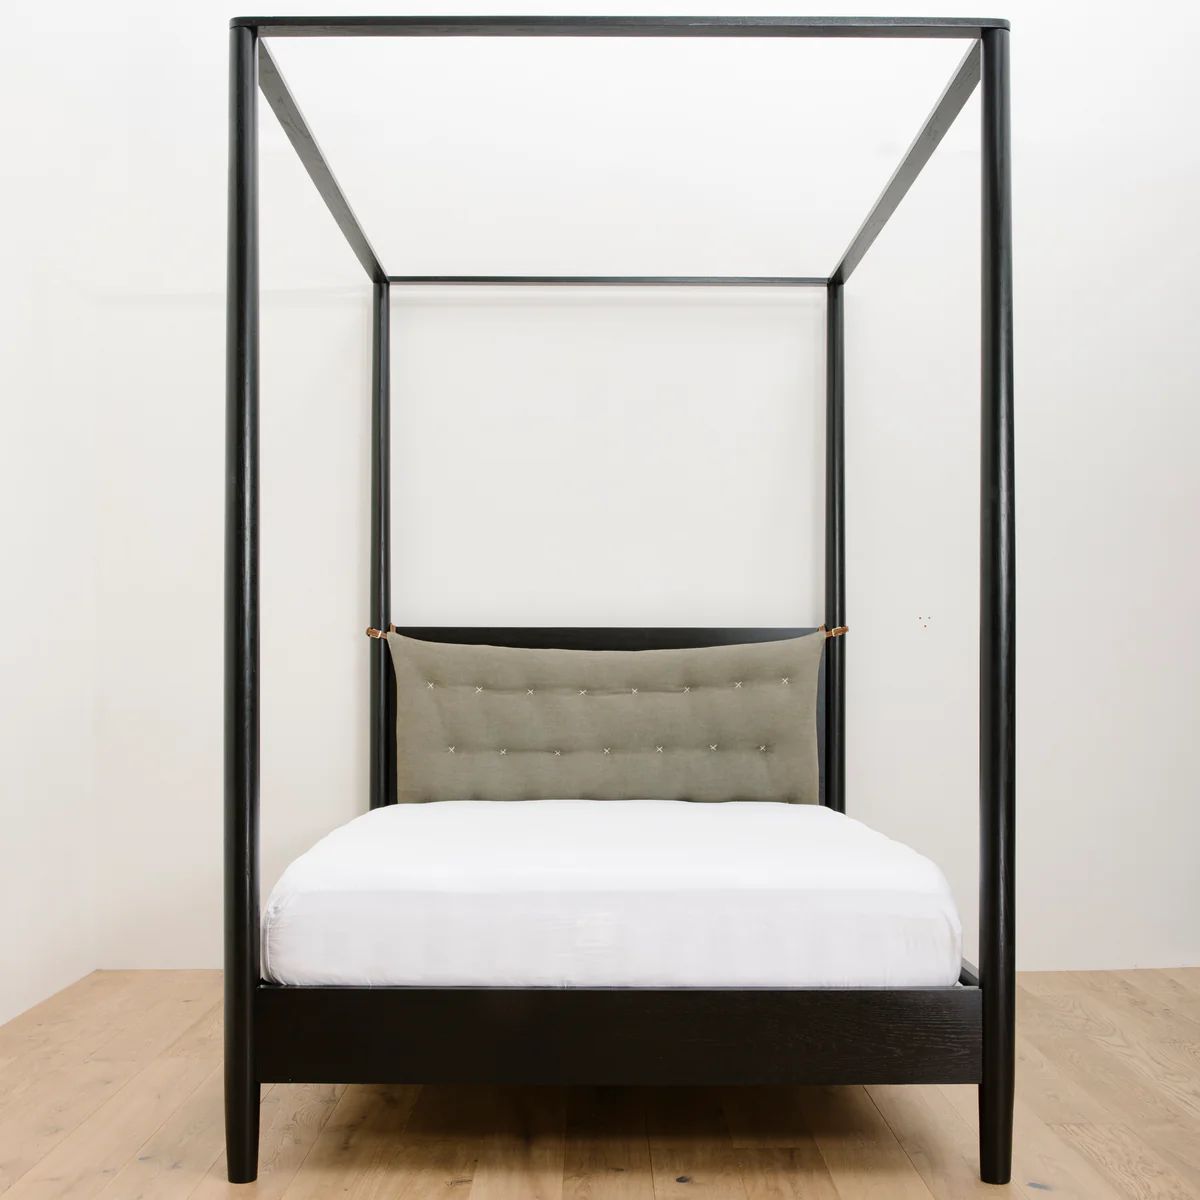 Penny Canopy Bed | Amber Interiors